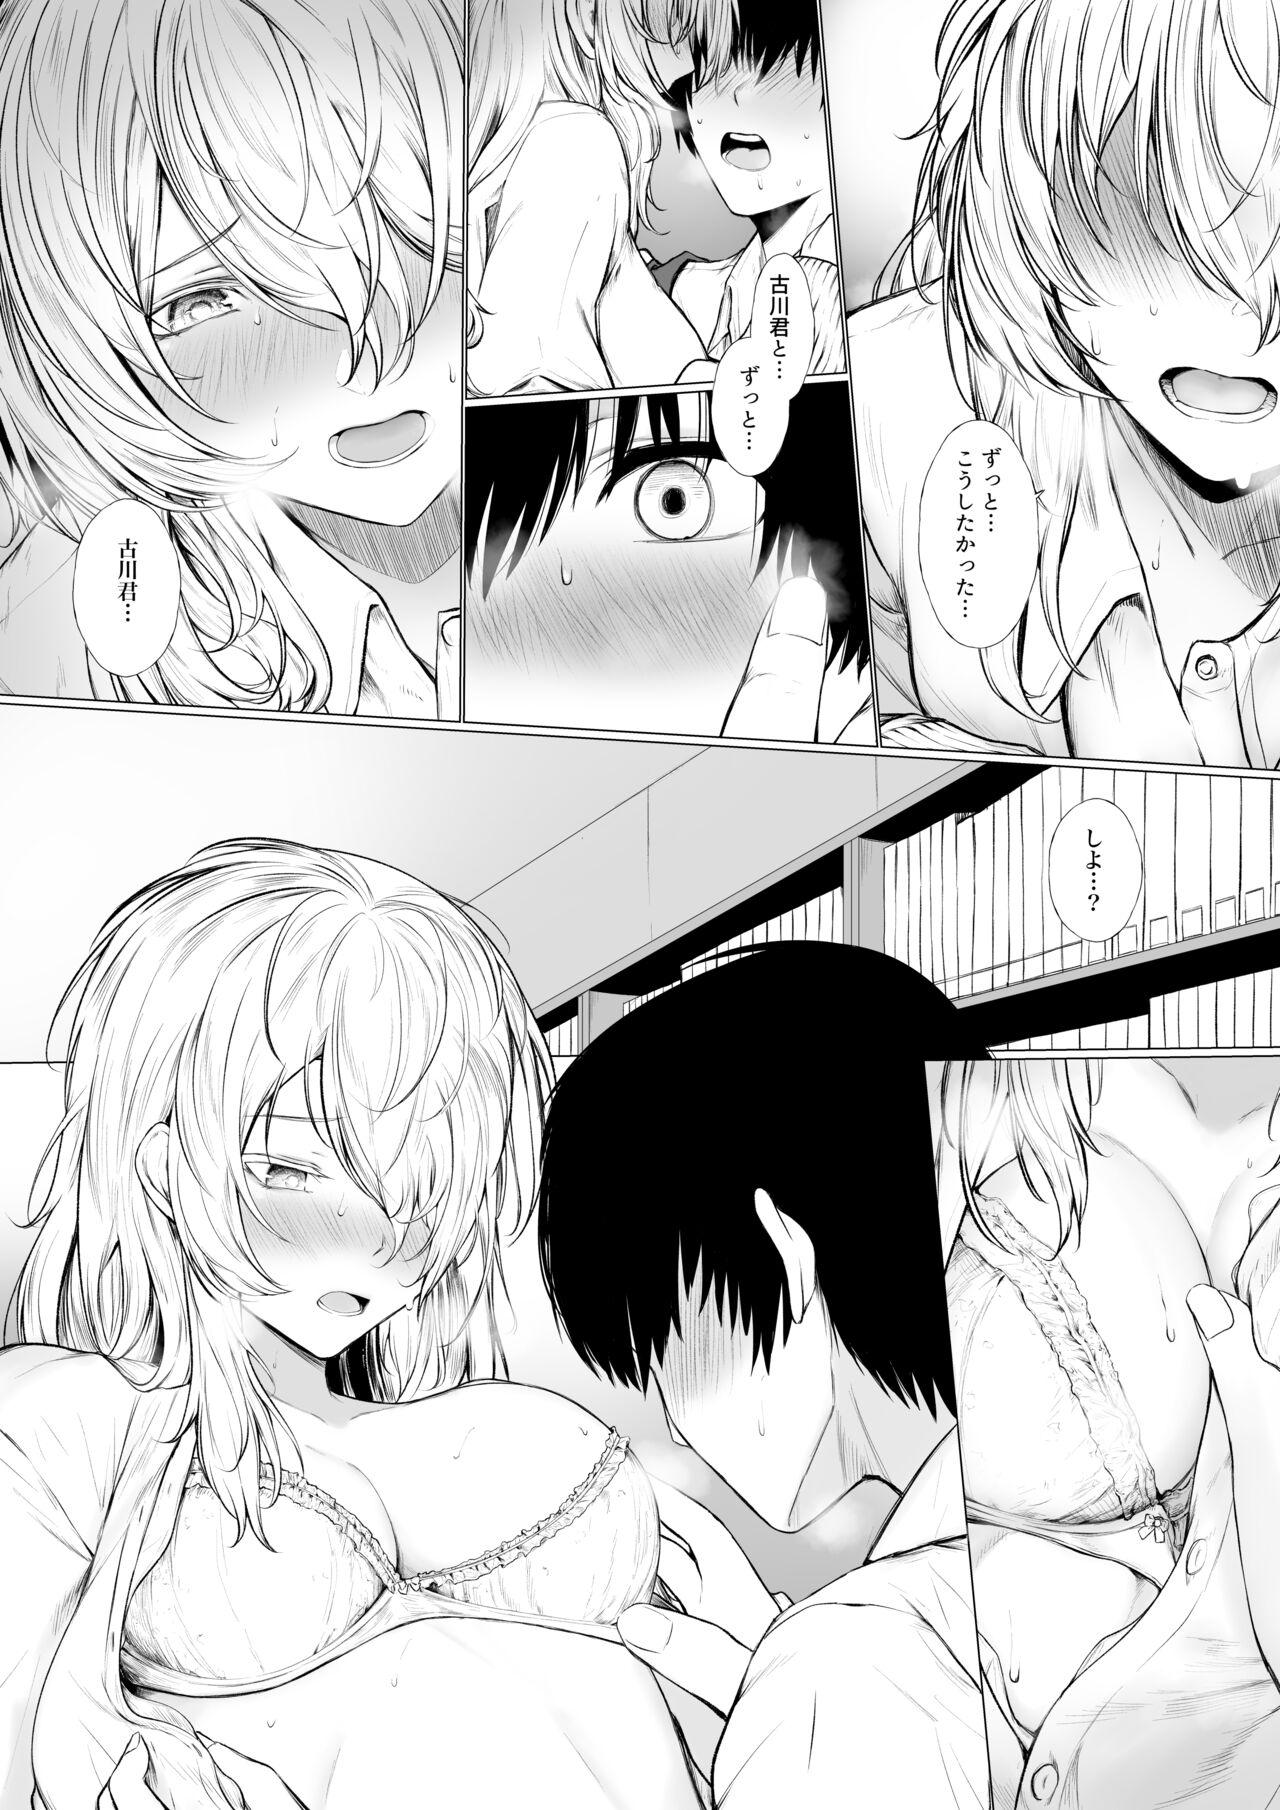 Cheating 眠り姫と図書室で - Original Gay Brownhair - Page 9